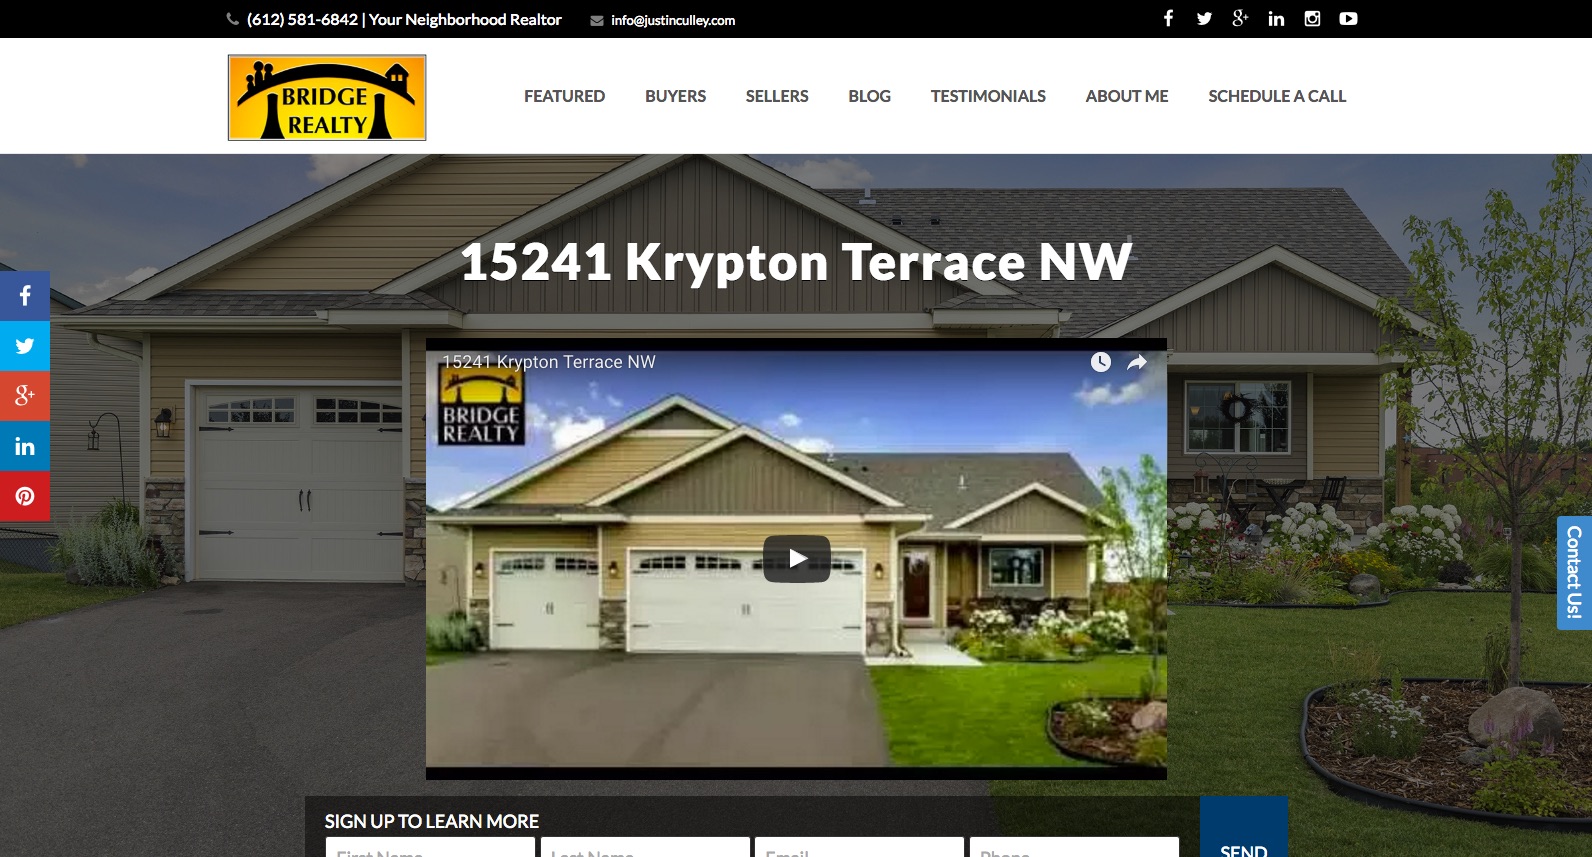 15241_Krypton_Terrace_NW_is_FOR_SALE_